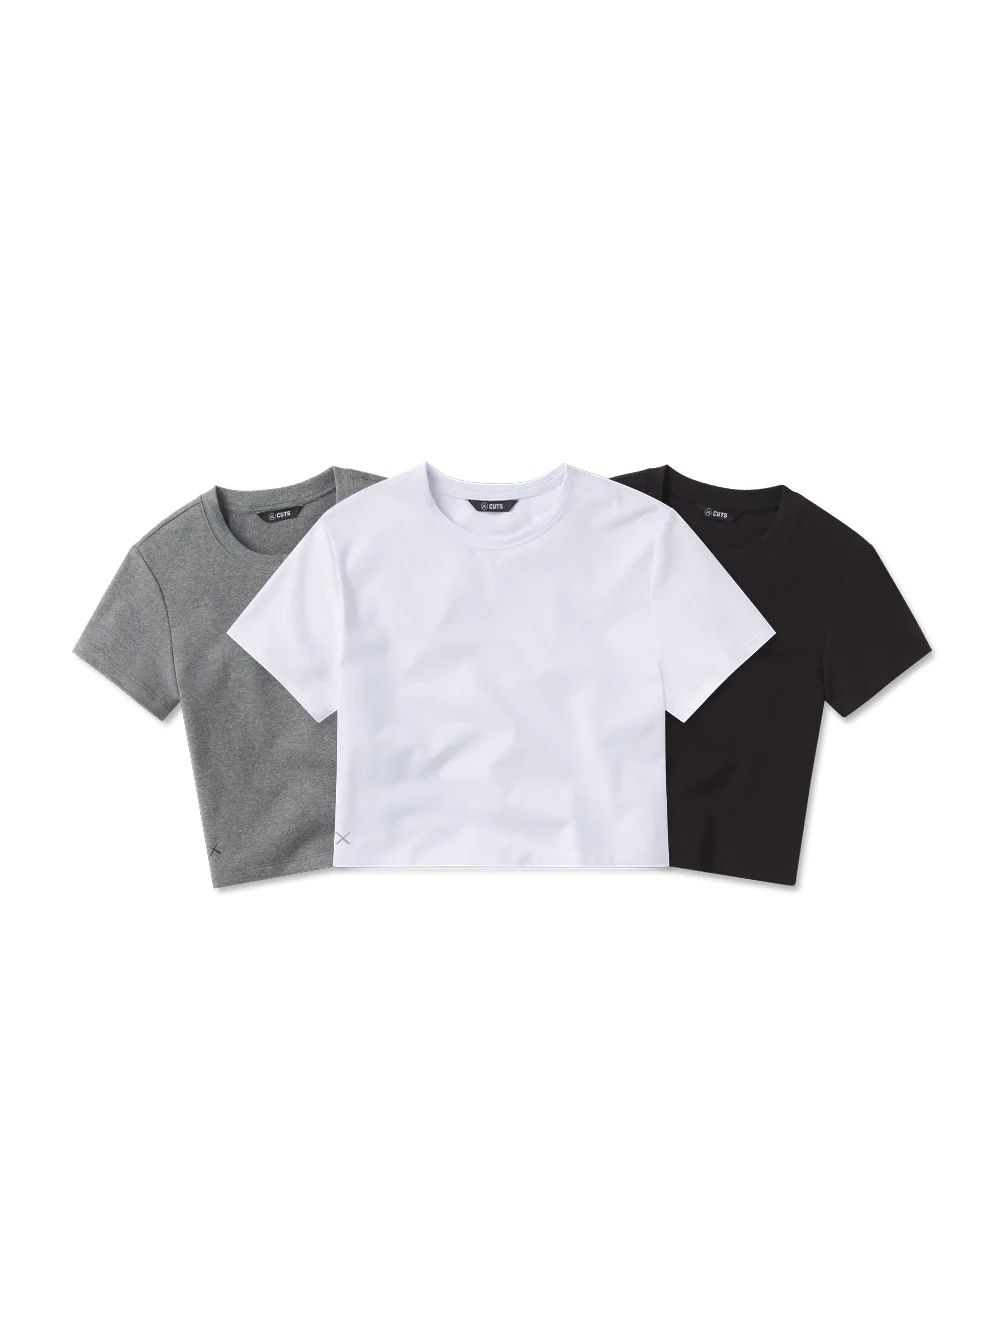 Cropped Tees Kit | Cuts Clothing